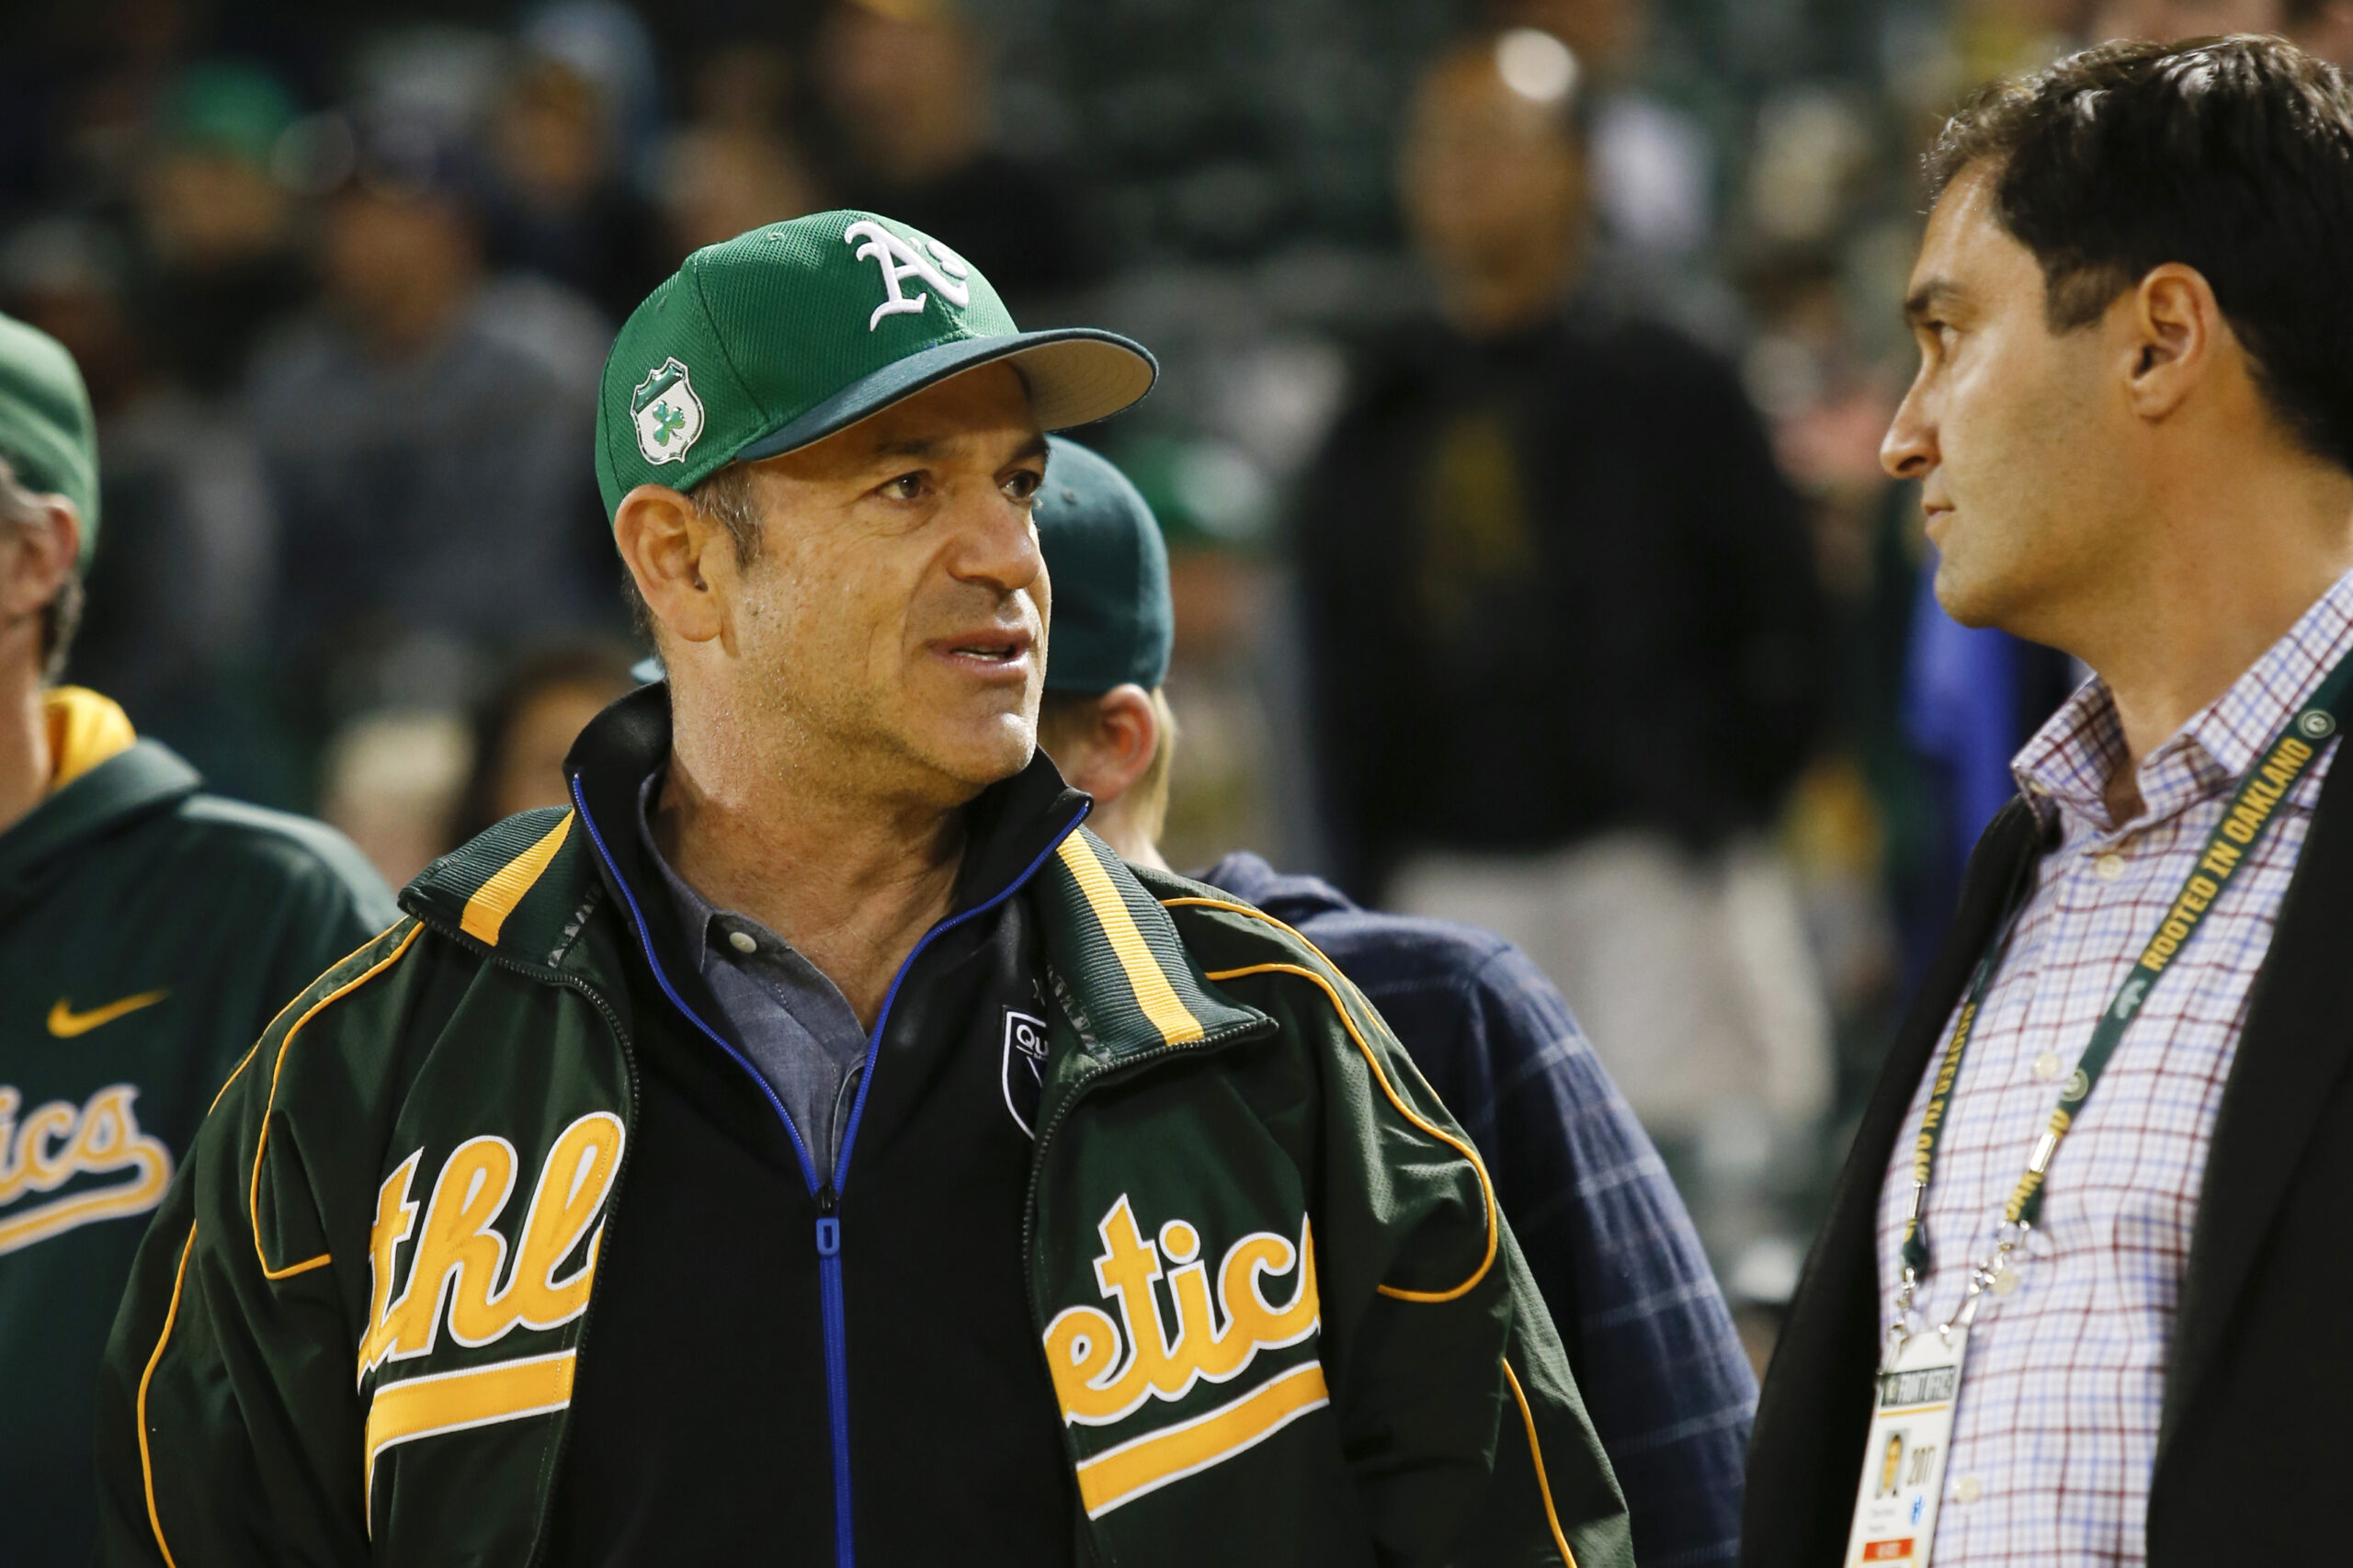 A man in an Oakland Athletics jacket and green Athletics cap stands to the left of a man in a blue shirt.